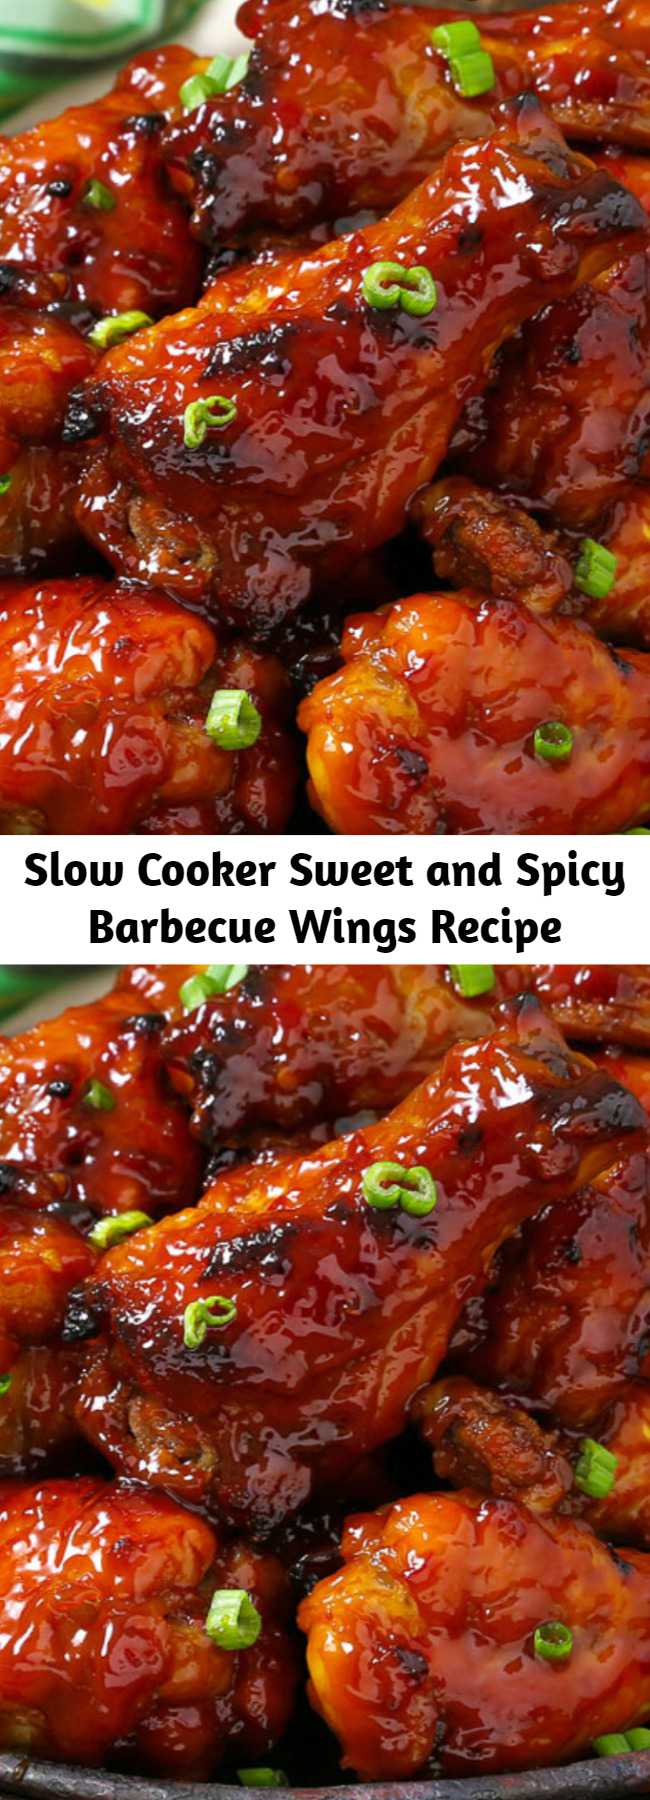 Smoky Habanero Barbecue Grilled Chicken Wings - Project 